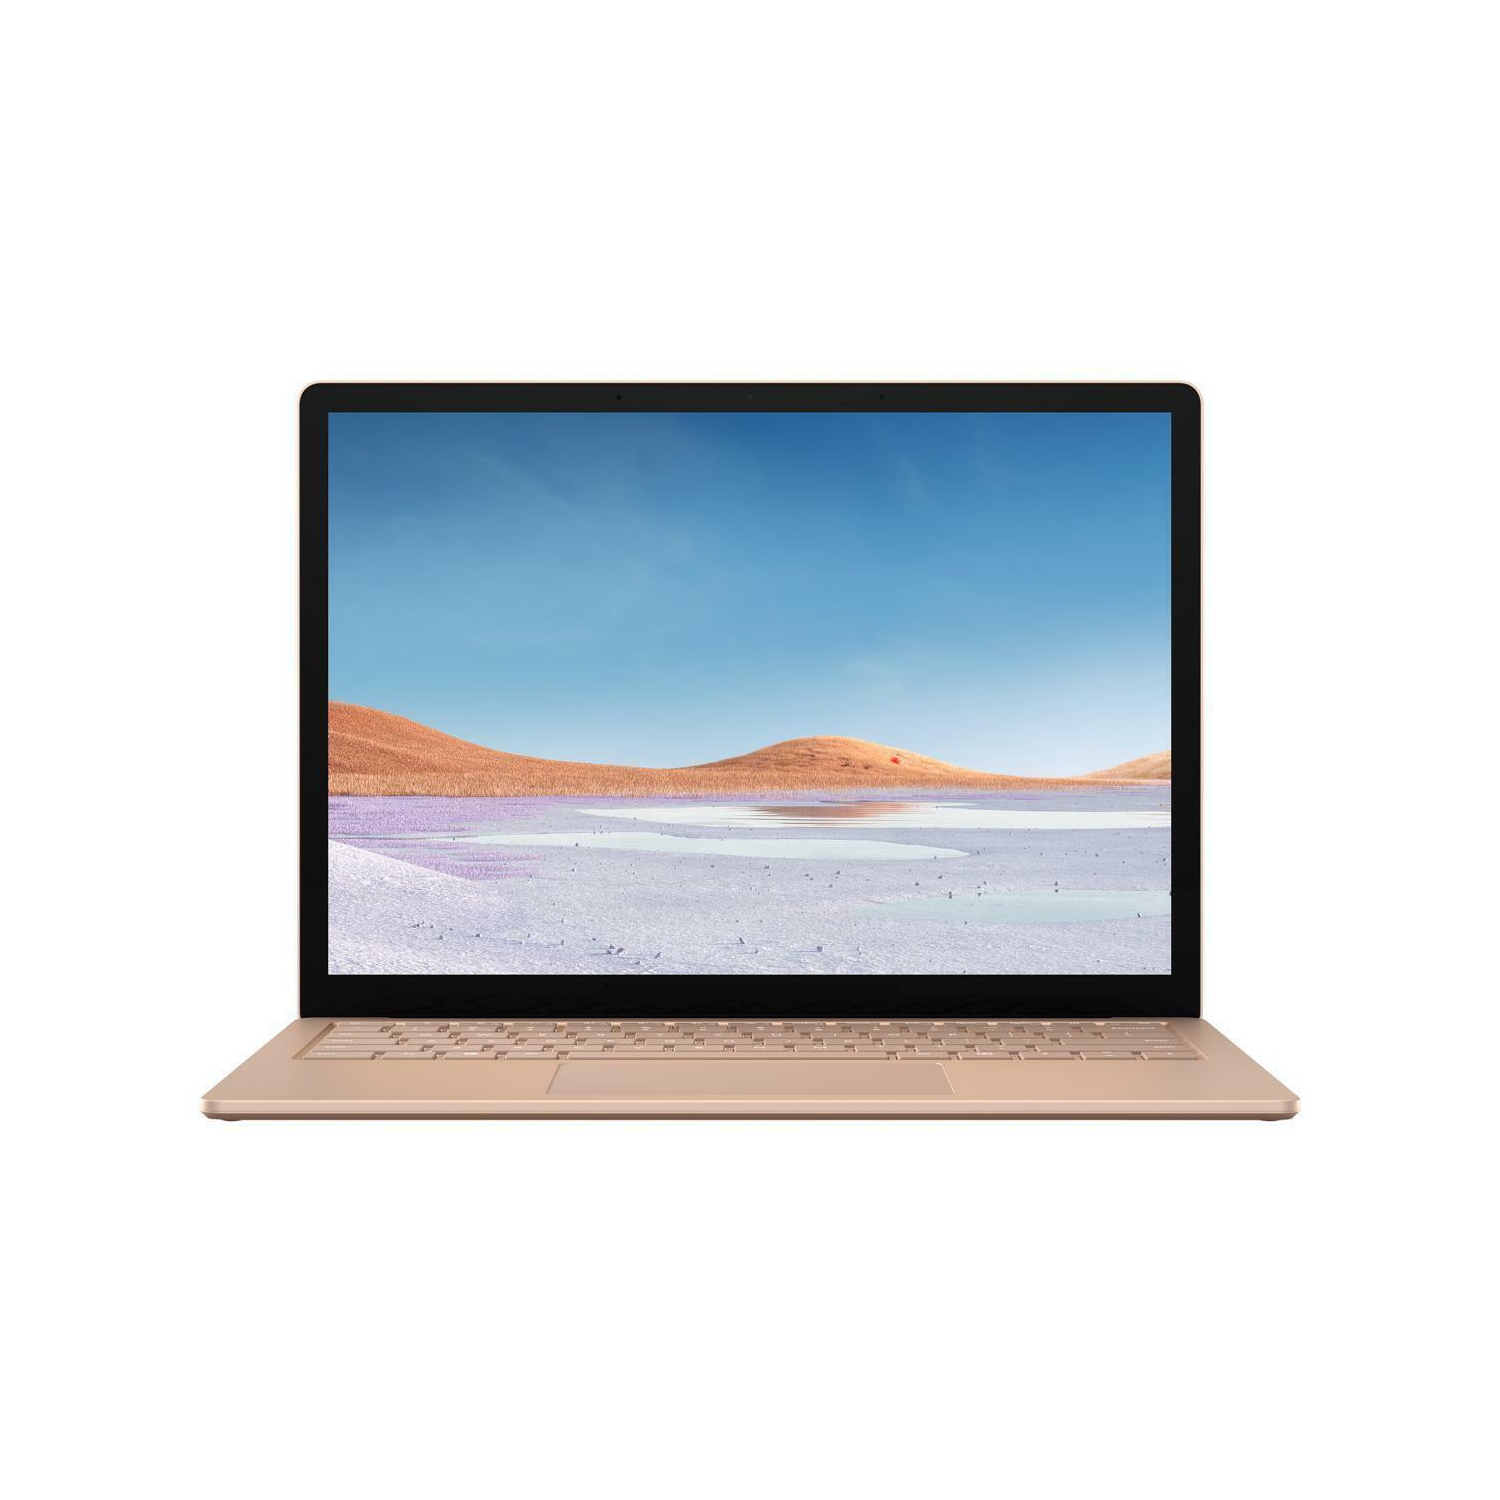 Refurbished (Excellent) Microsoft Surface Laptop 3 13.5" Touch i7 16GB 256GB Certified Refurbished